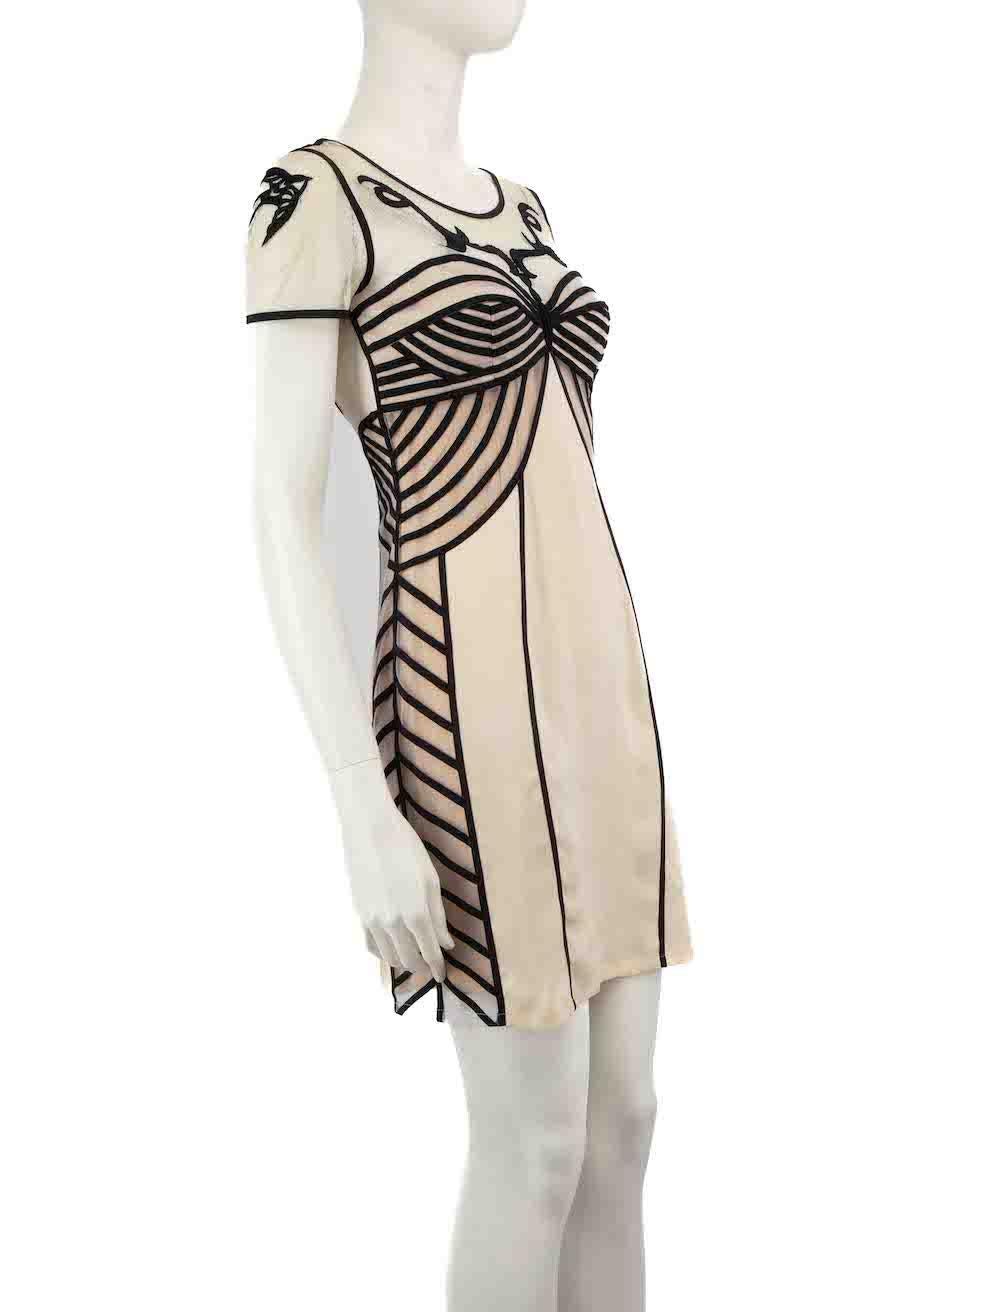 CONDITION is Good. General wear to dress is evident. Moderate signs of wear to the front and back with discoloured marks and plucks to the weave on this used Temperley London designer resale item. Brand label has been removed.
 
 Details
 Beige
